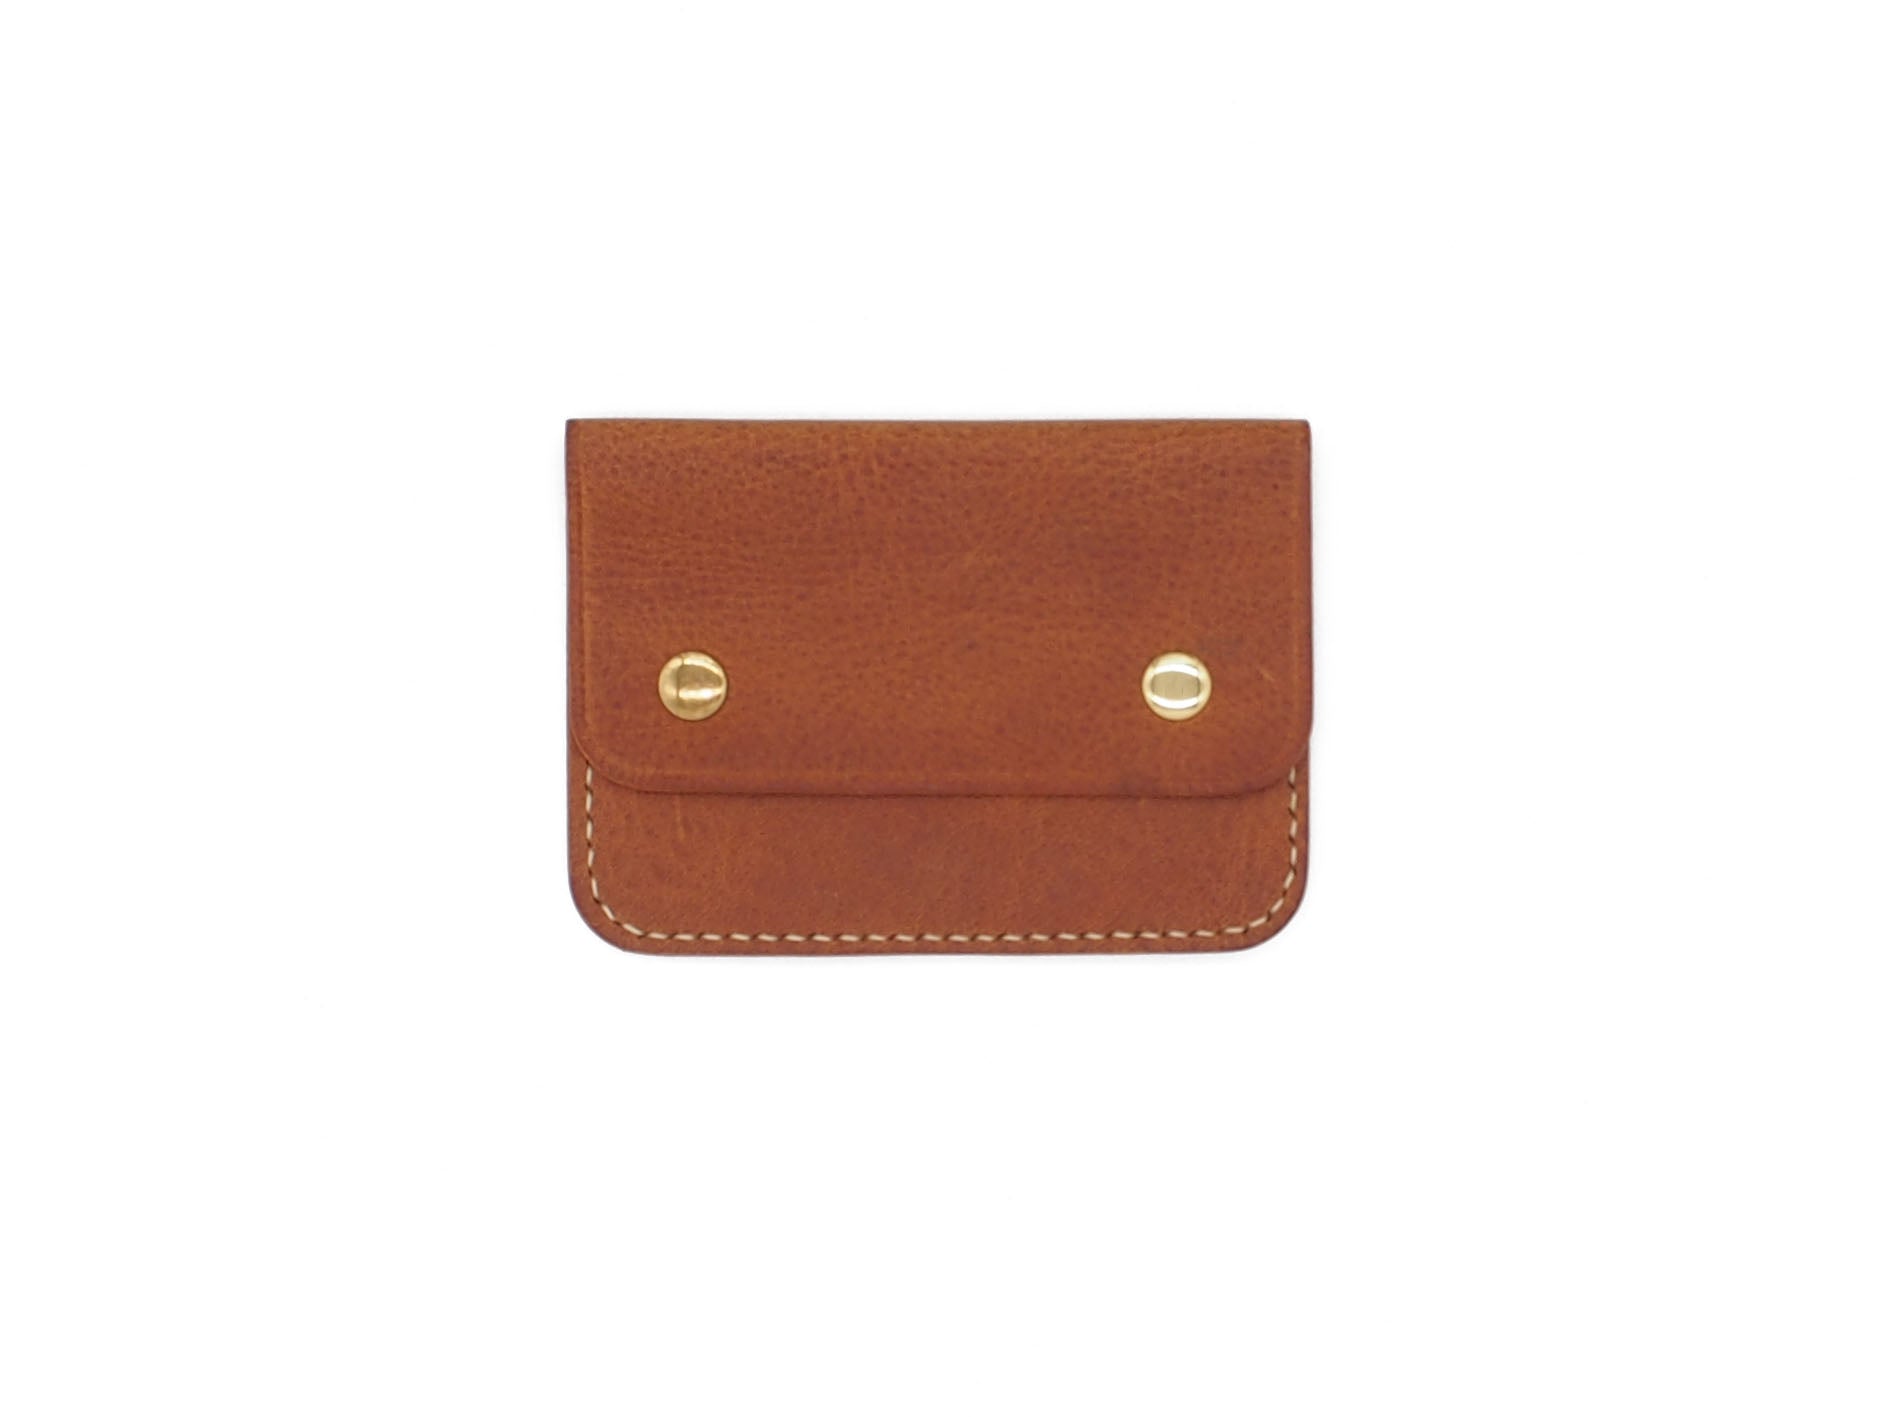 Utility Pocket - Snap Pouch Wallet In Arnia Rustico